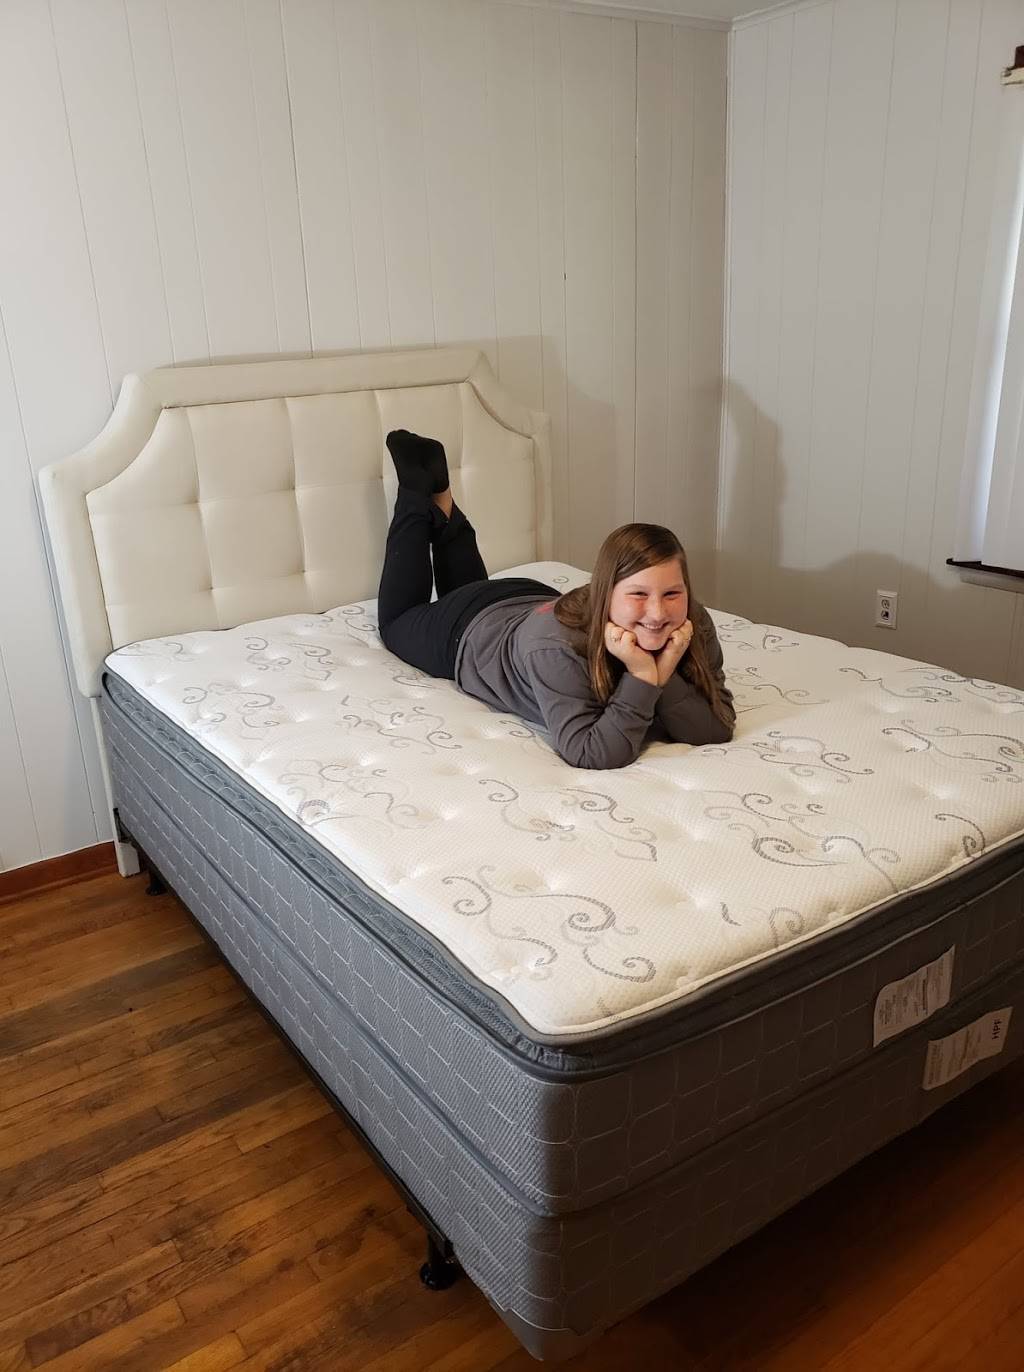 Mattress By Appointment - furniture store  | Photo 8 of 8 | Address: 11003 Bluegrass Pkwy #410, Louisville, KY 40299, USA | Phone: (502) 536-9552